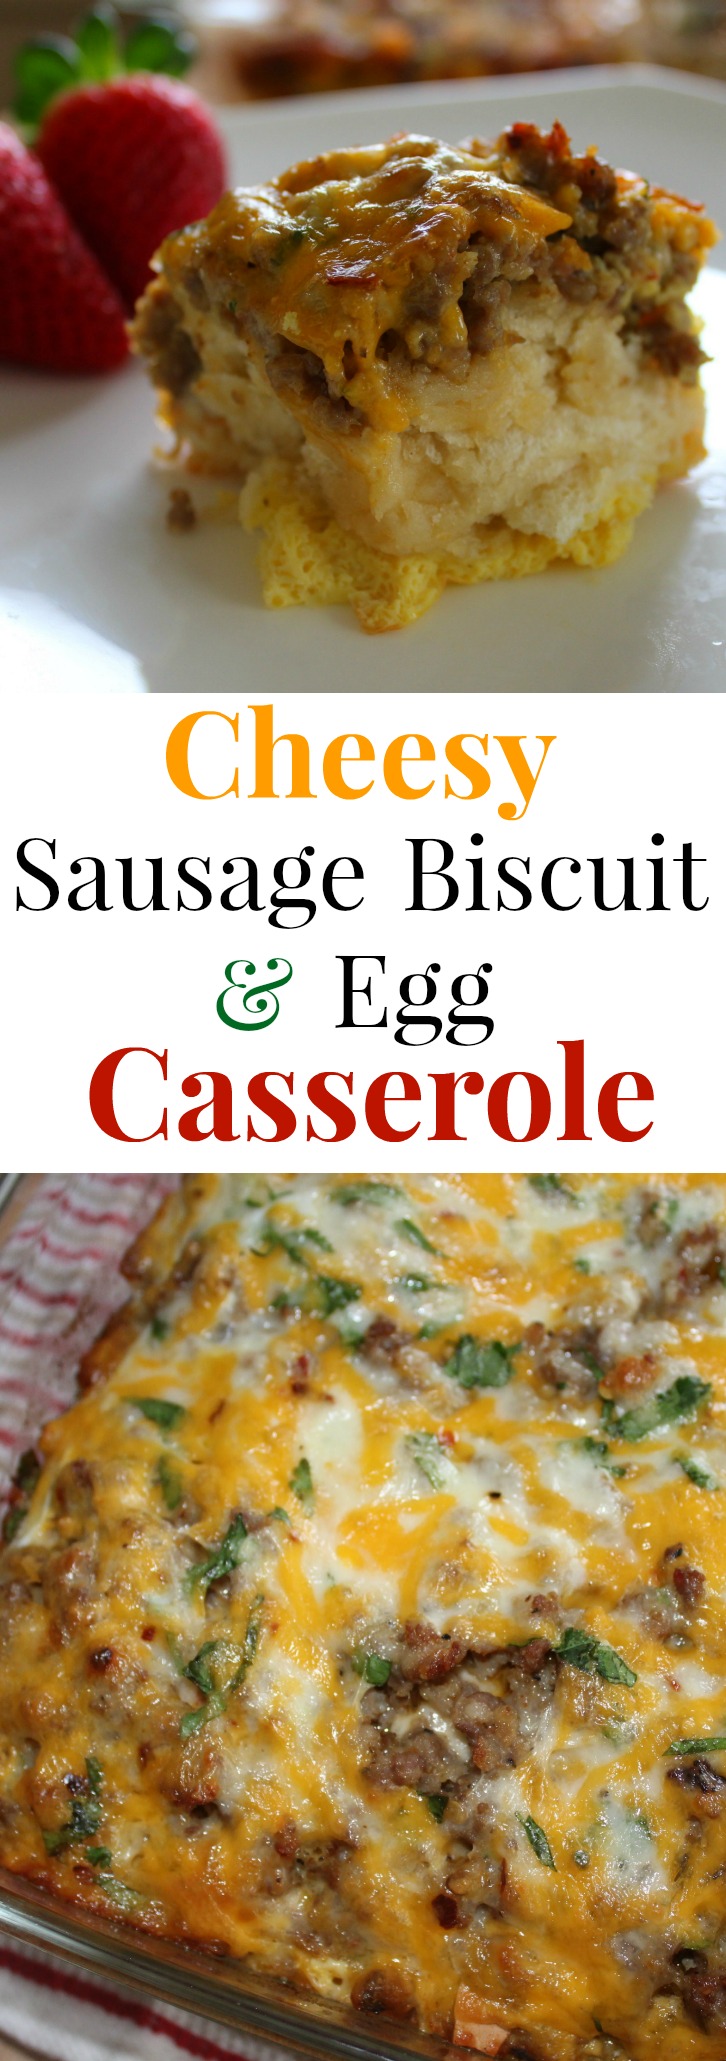 Sausage Biscuit and Egg Casserole